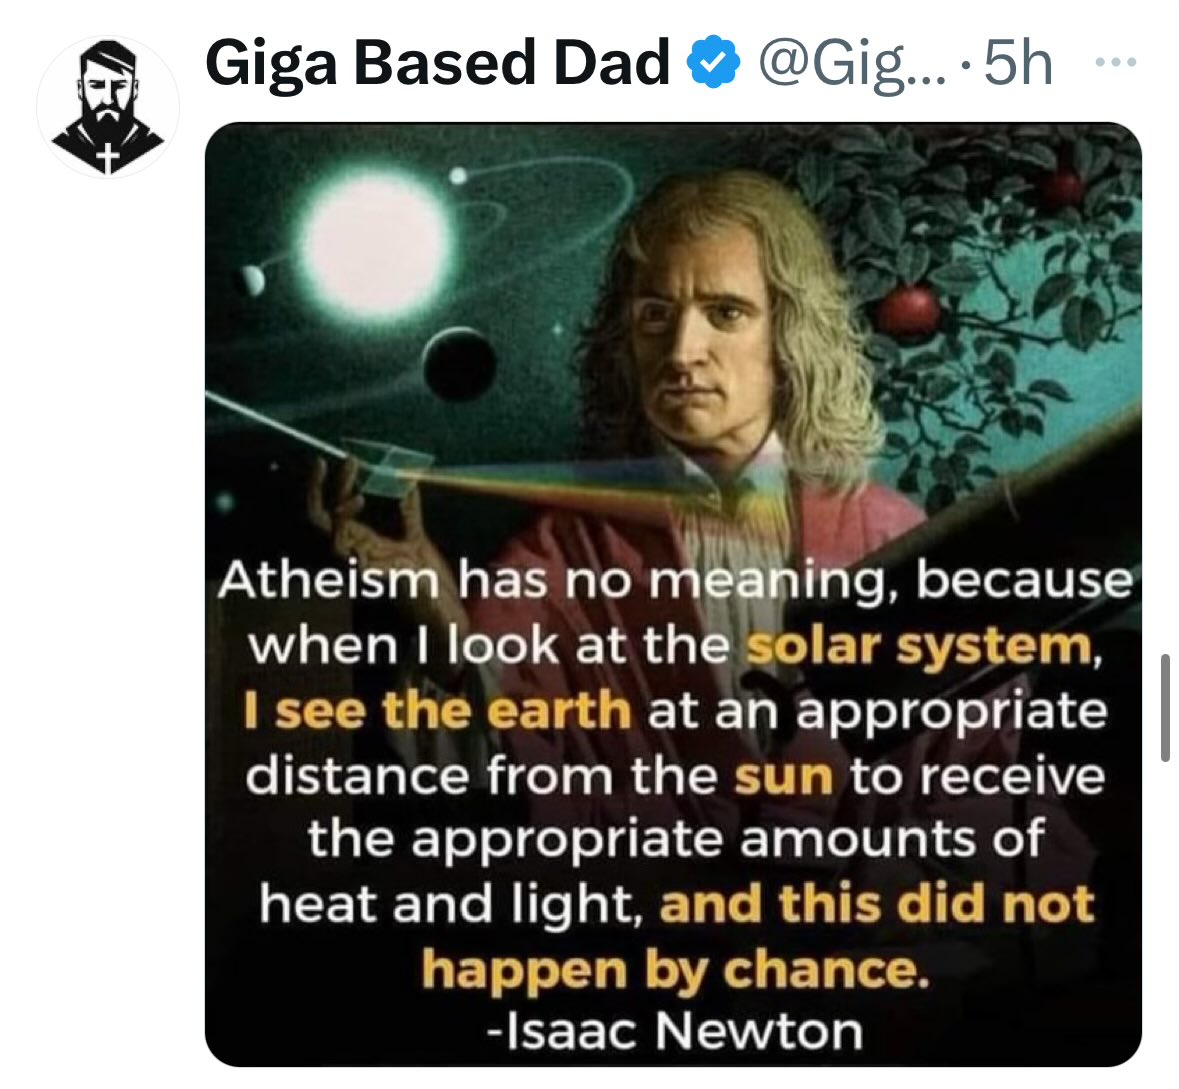 Welcome to the puddle, @GigaBasedDad!

You don't seem to know what atheism is or how anything works, really.

We happen to exist in a world that happened to have an ideal environment to harbour life.

If it weren't the case, you would not know, because you would not exist!